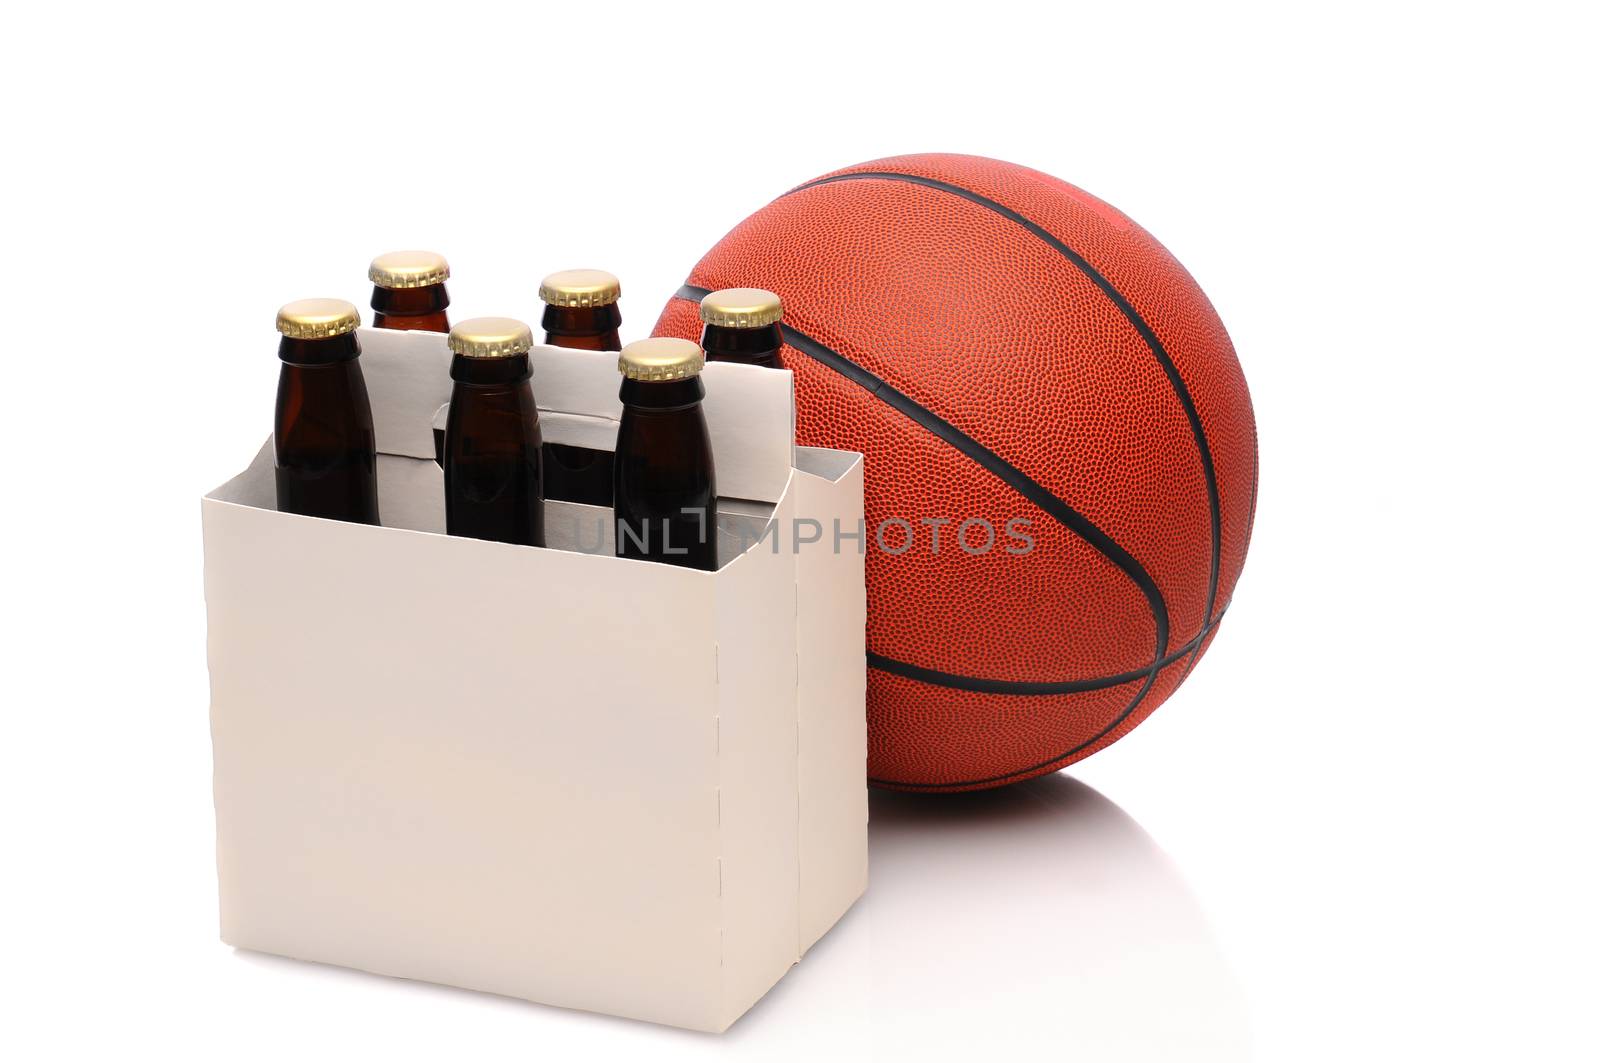 Basketball and six pack of beer by sCukrov